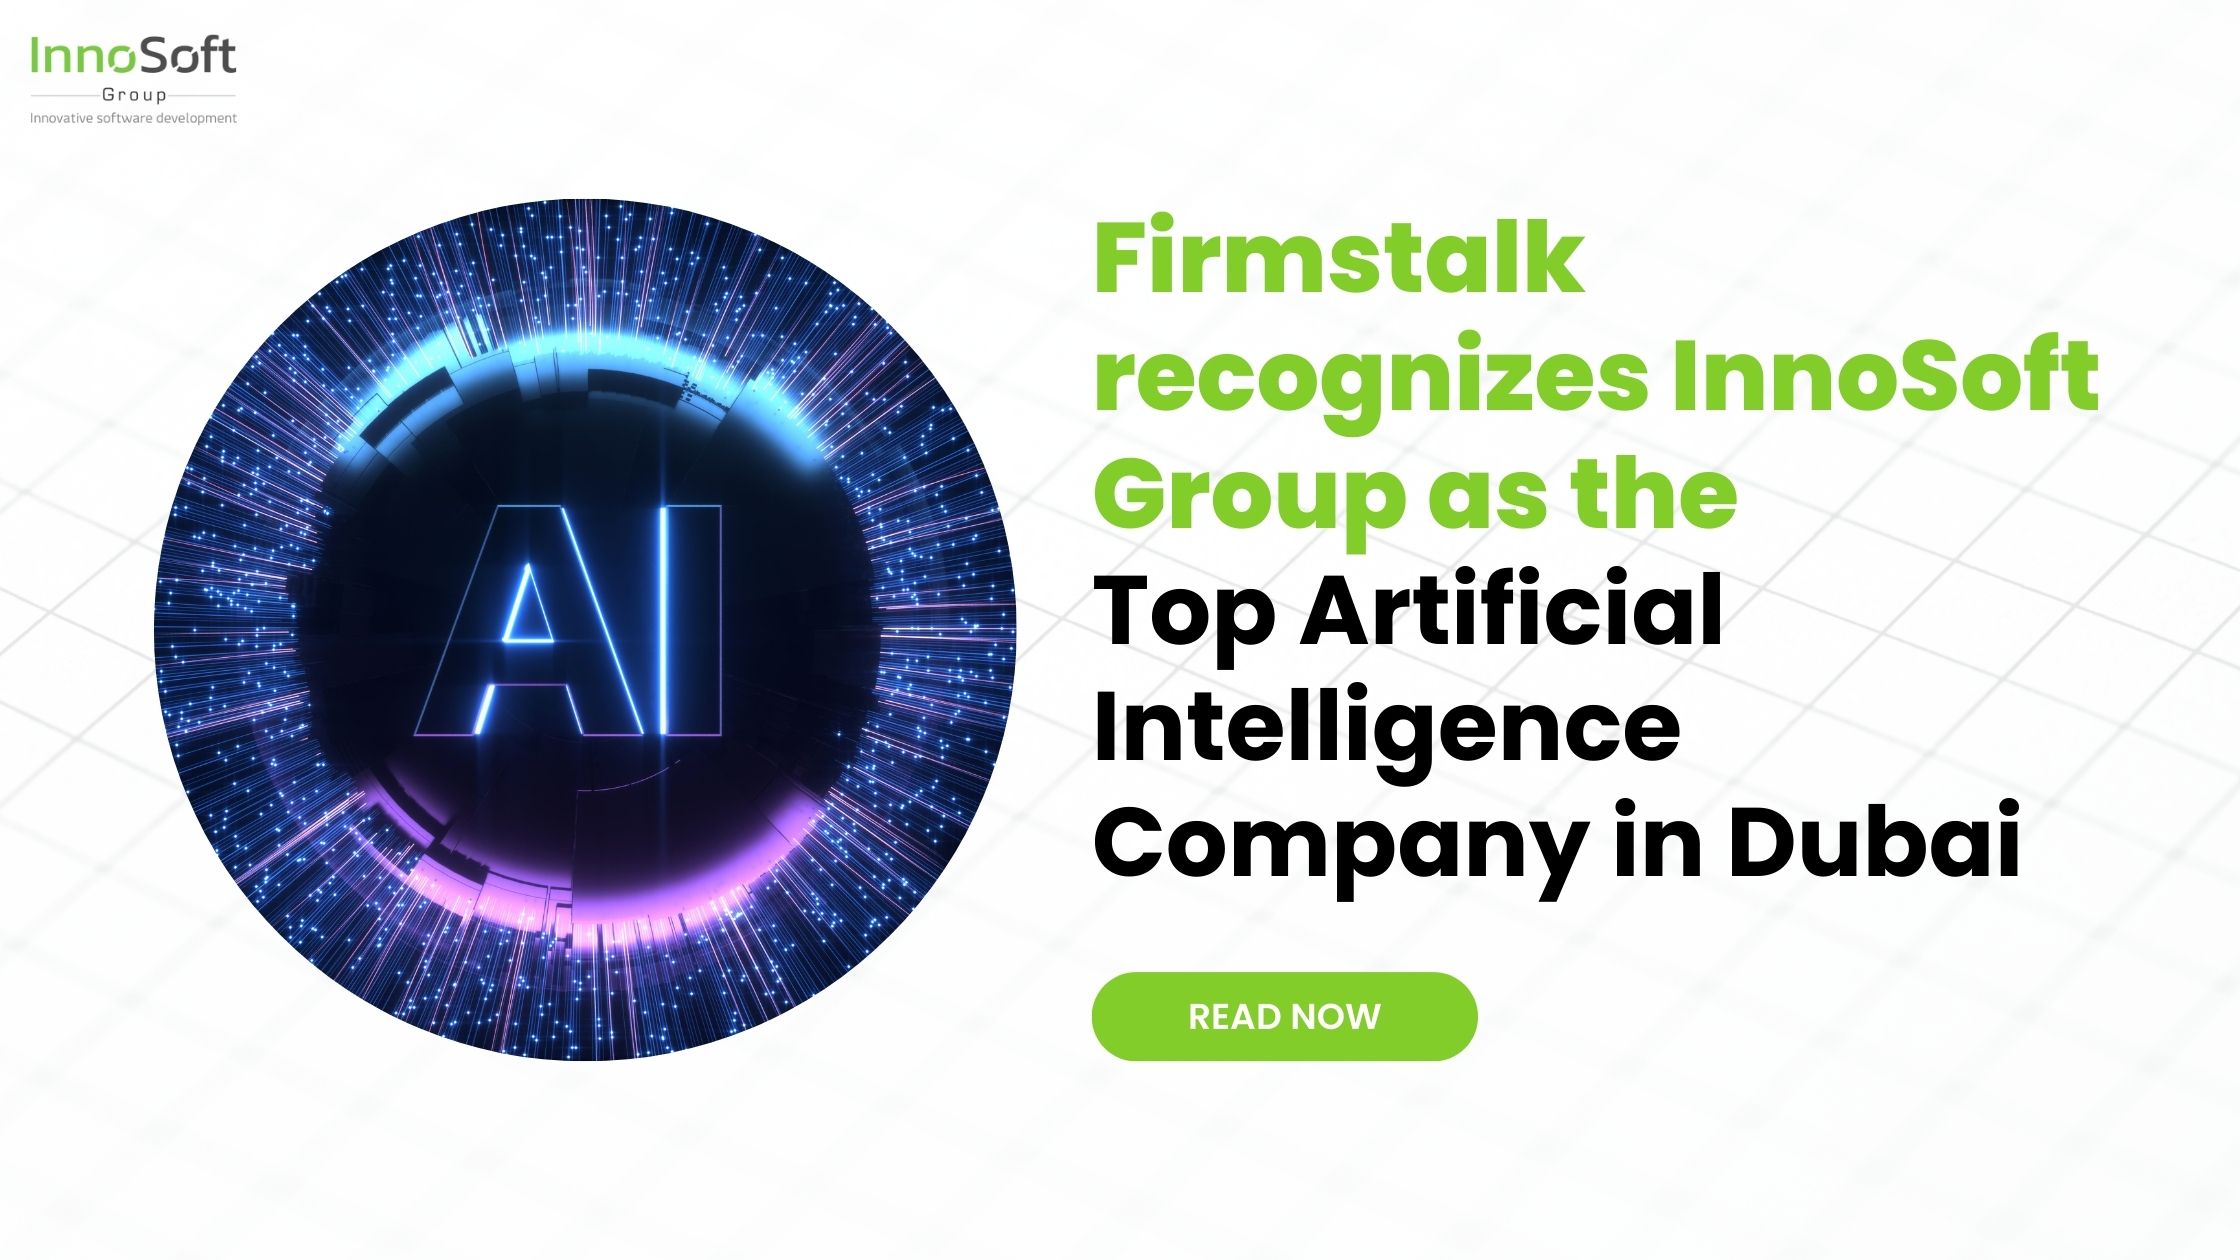 Firmstalk recognizes InnoSoft Group as the Top Artificial Intelligence Company in Dubai, UAE